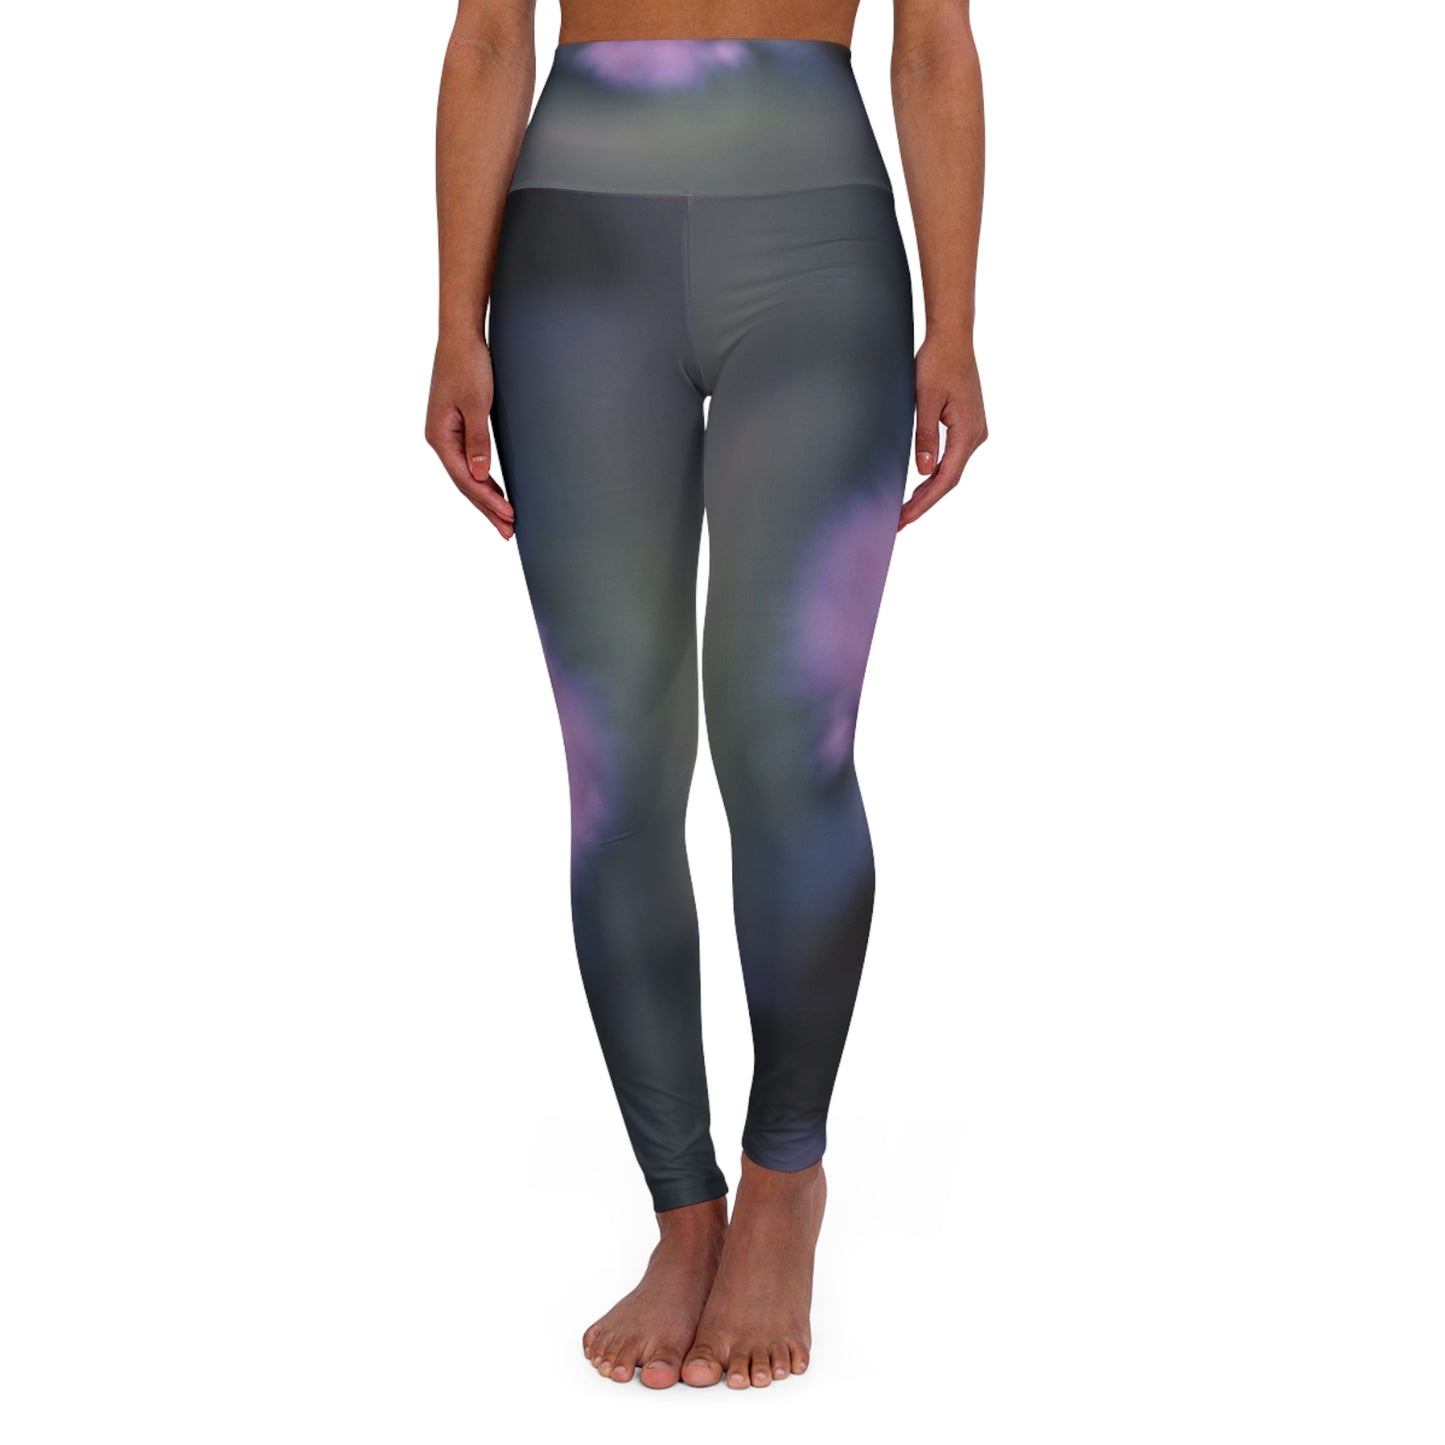 Purple Lotus Flower Artistic Abstract Skinny Fit High Waisted Yoga Leggings, Expertly Crafted in the USA